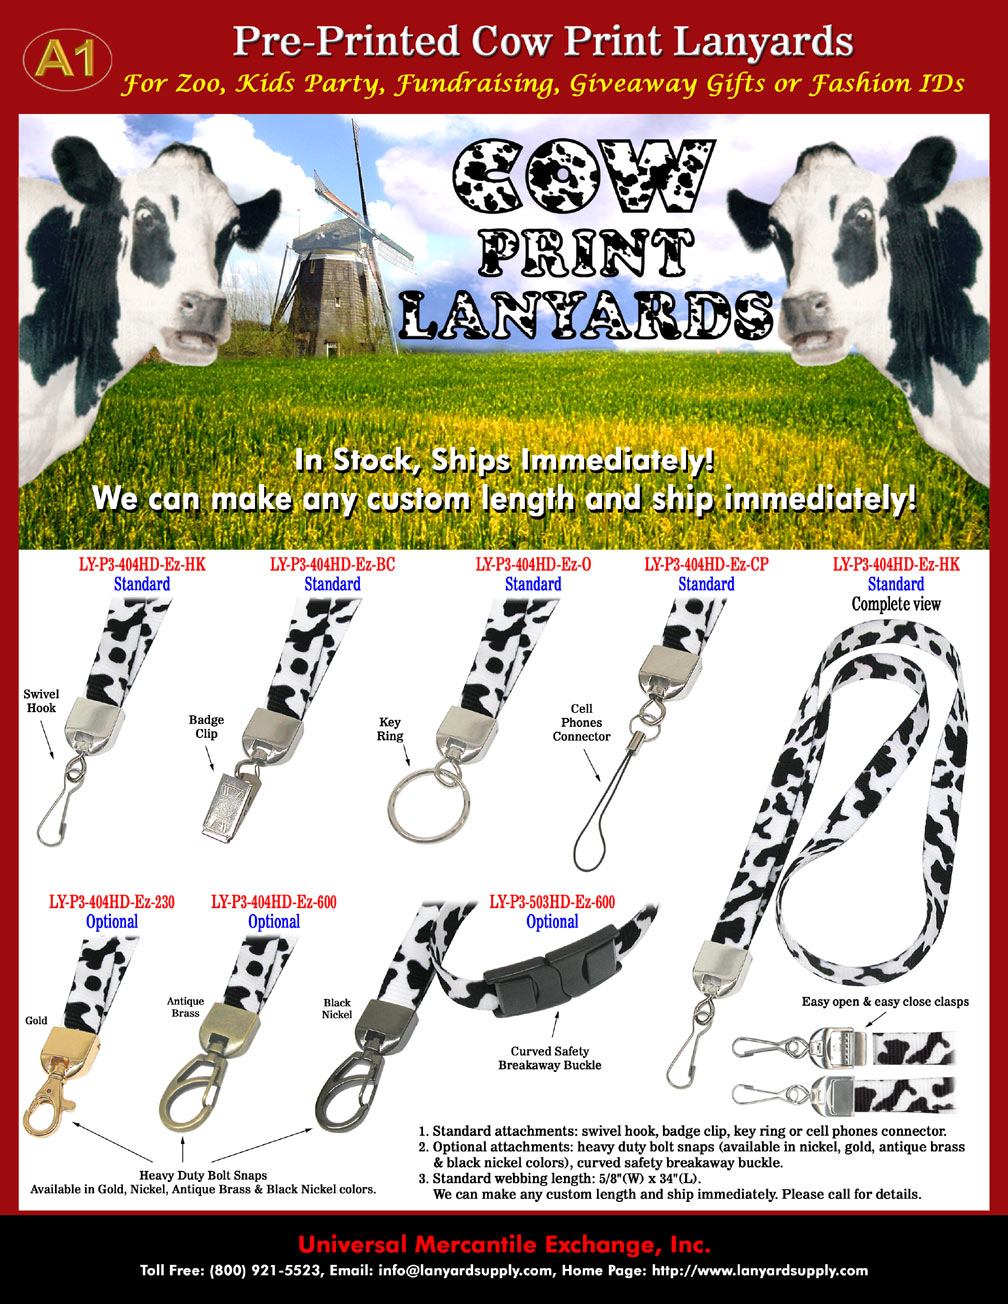 Cow Lanyards: Cow Print Lanyards, Cow Spots or Cow Patterns Printed Animal Lanyards. Good For Zoo, Kids Party, Fundraising, Promotional Giveaway, Gifts or For 
Small Business Fashion Name Badges.